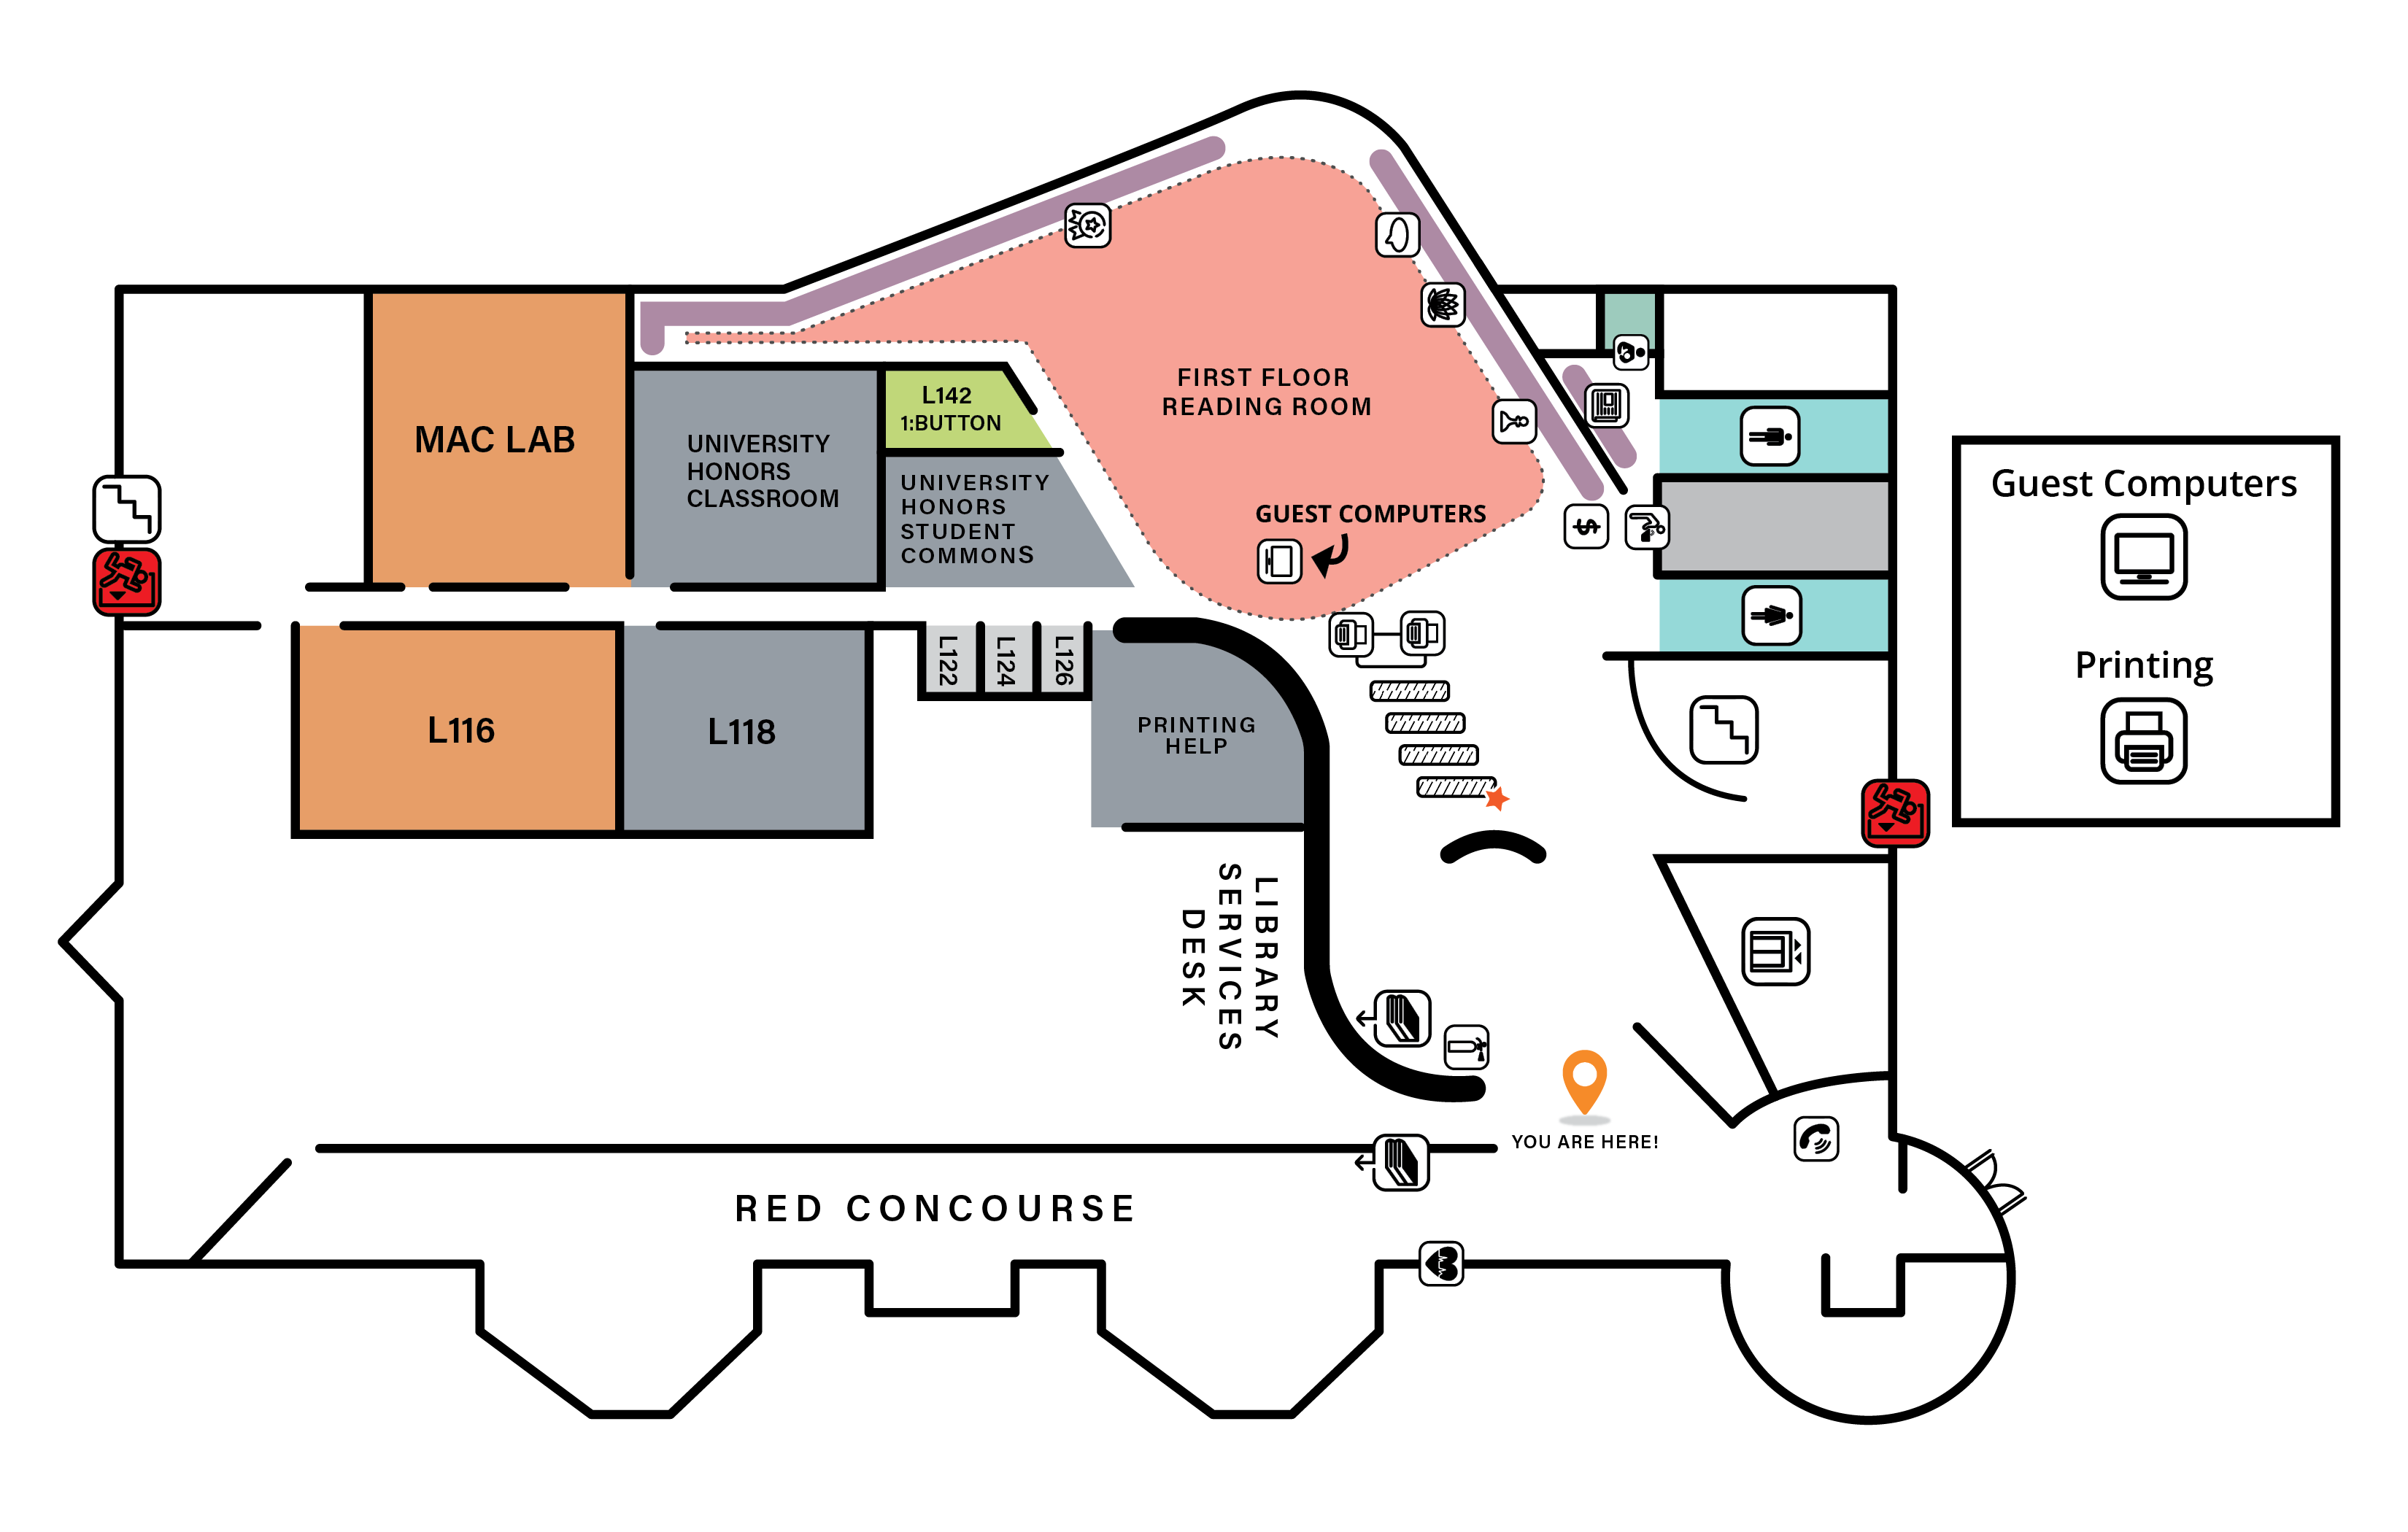 Map showing Guest Computers on first floor past circulation desk